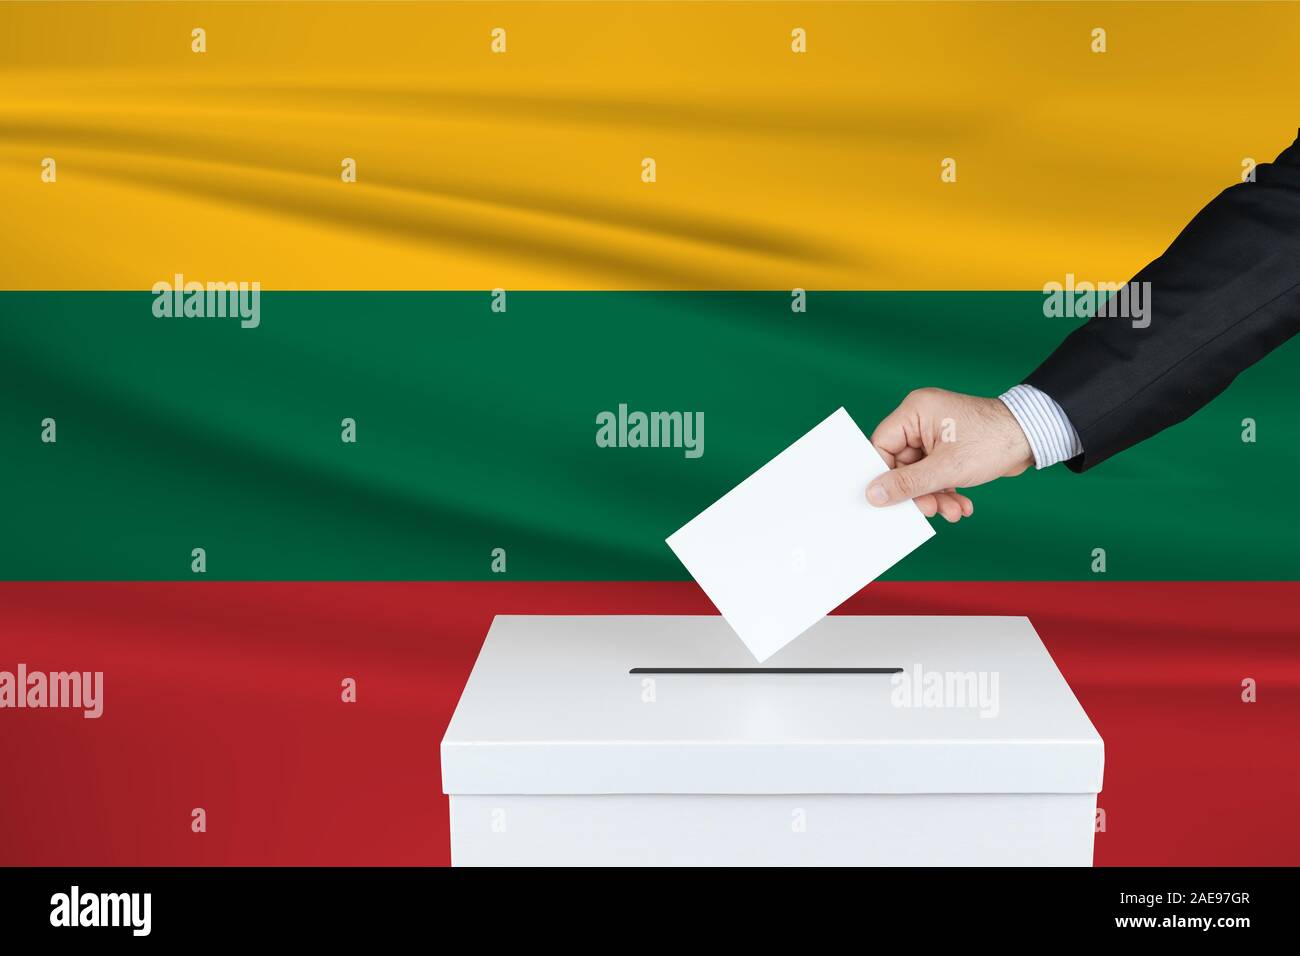 Election in Lithuania. The hand of man putting his vote in the ballot box. Waved Lithuania flag on background. Stock Photo